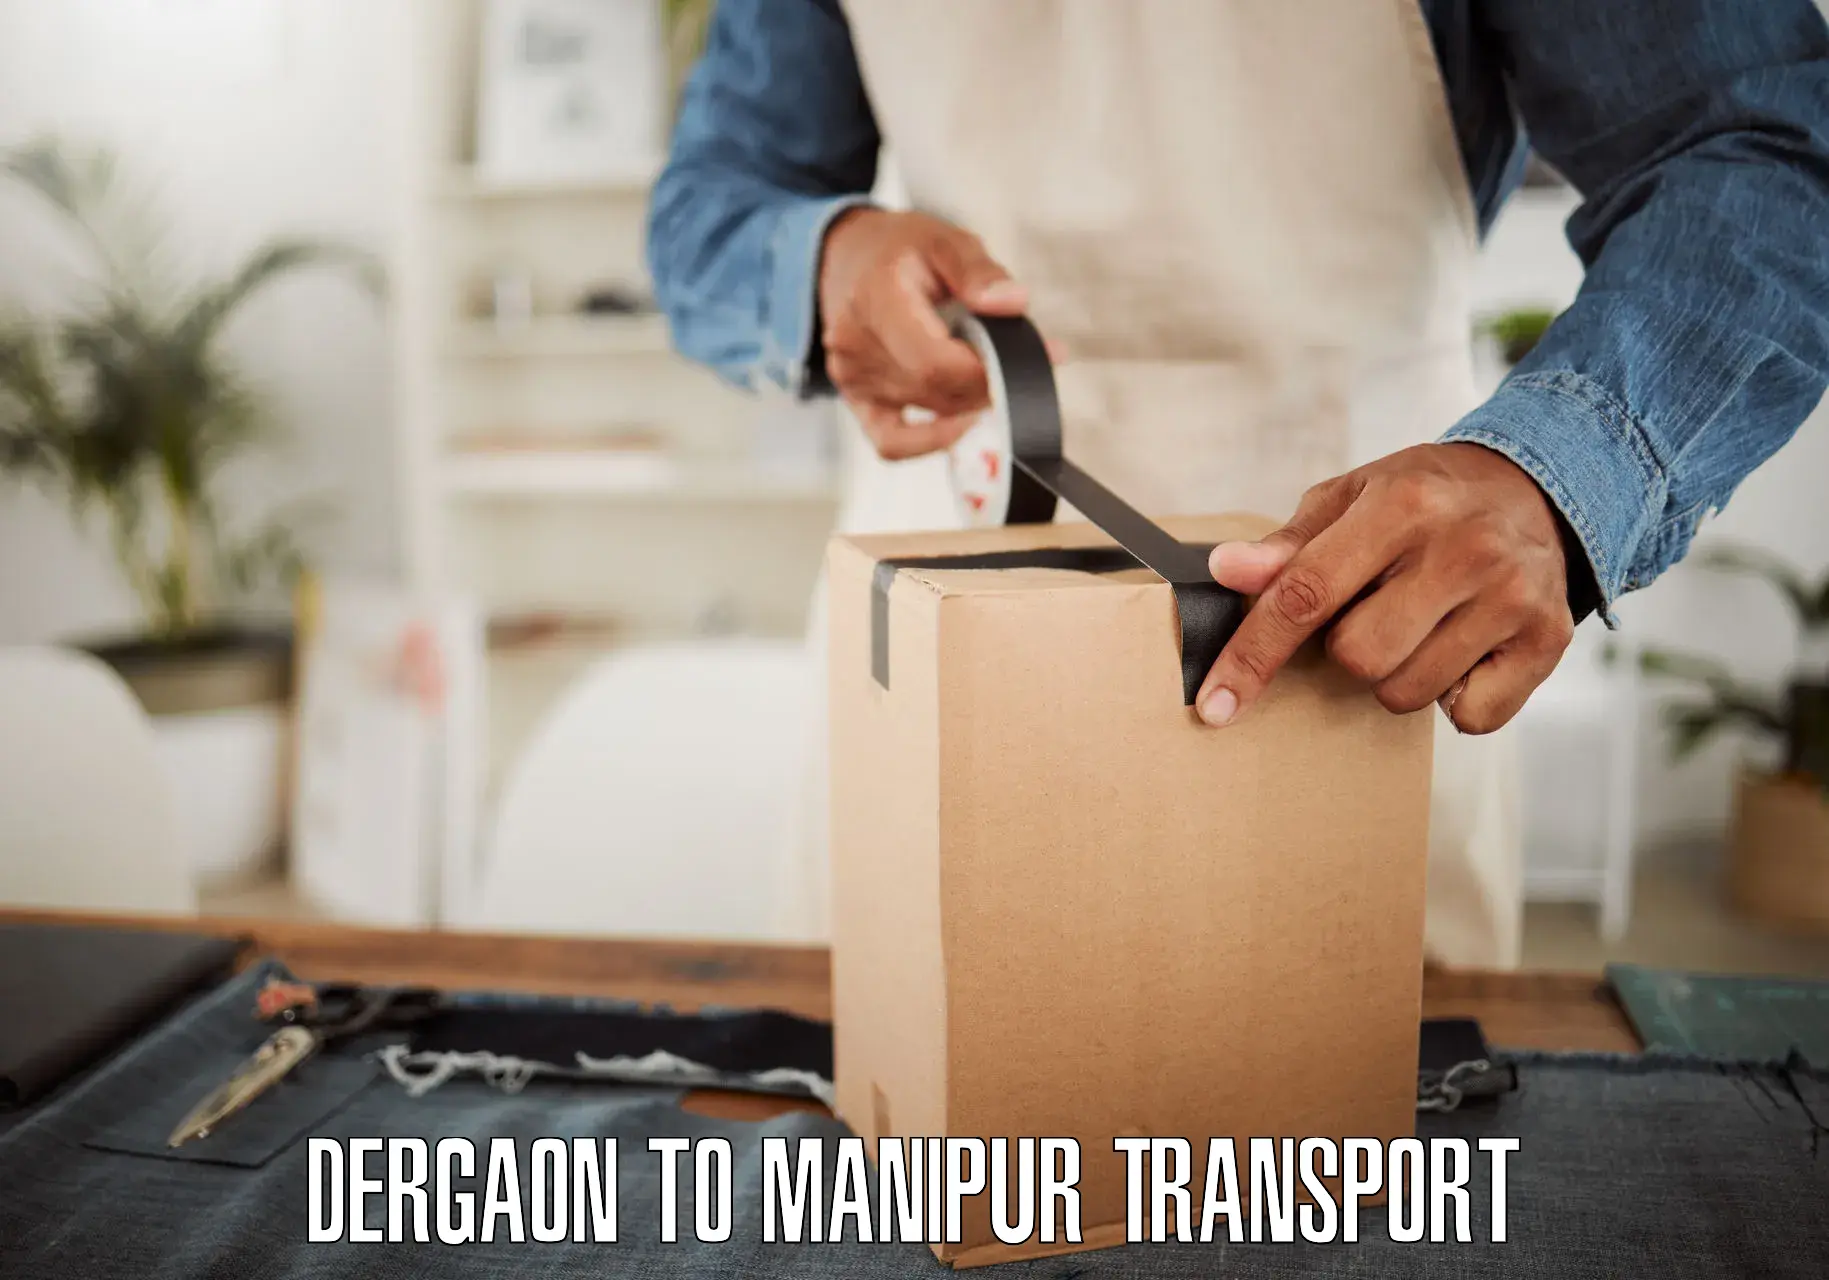 Daily transport service Dergaon to Manipur